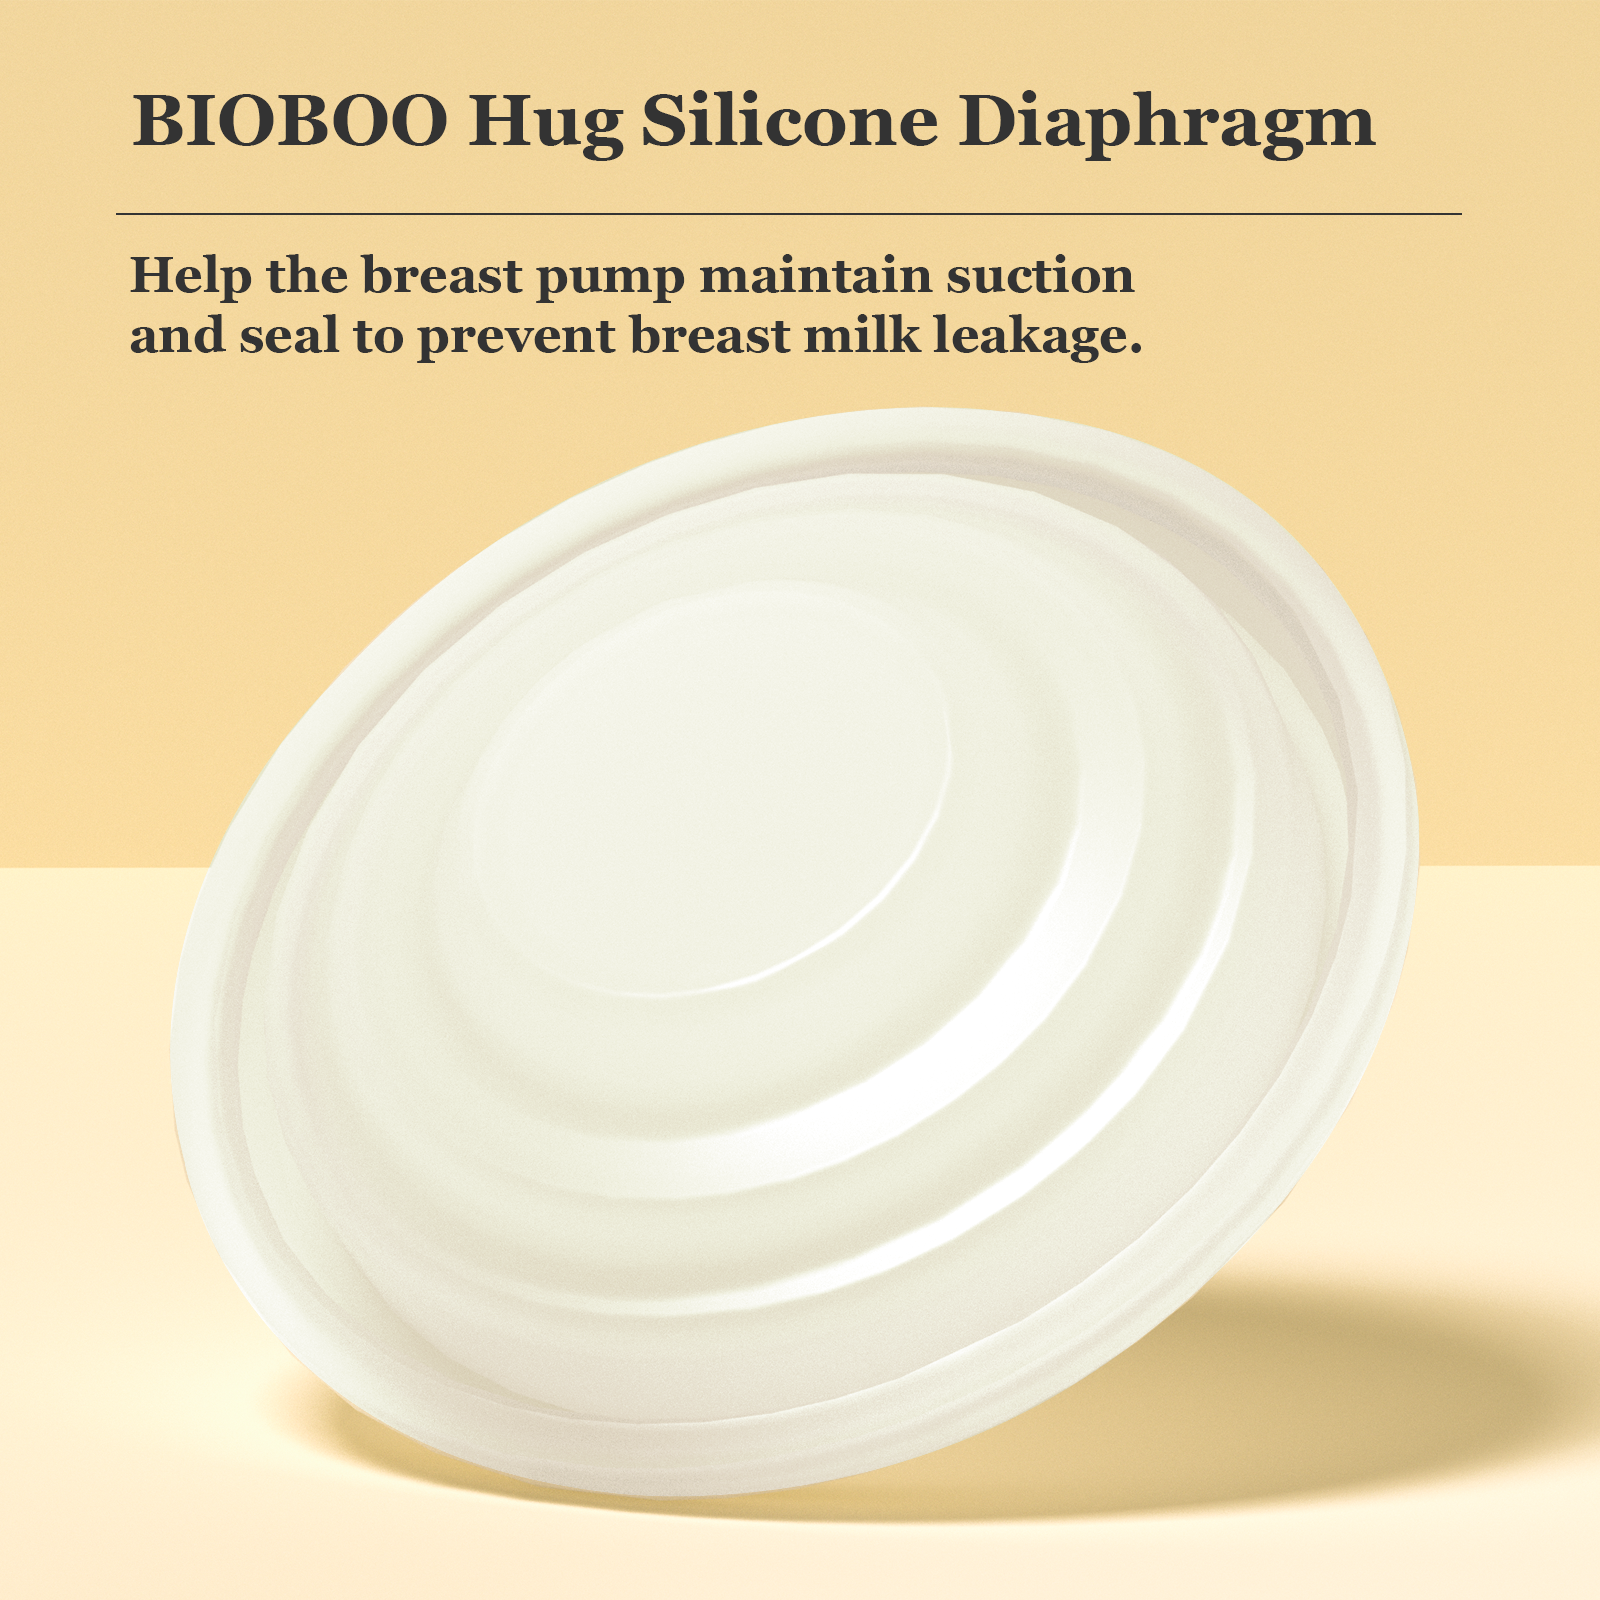 BIOBOO Breast Pump Replacement Parts-Duckbill Valves&Diaphragms&Rings, 2 Pack